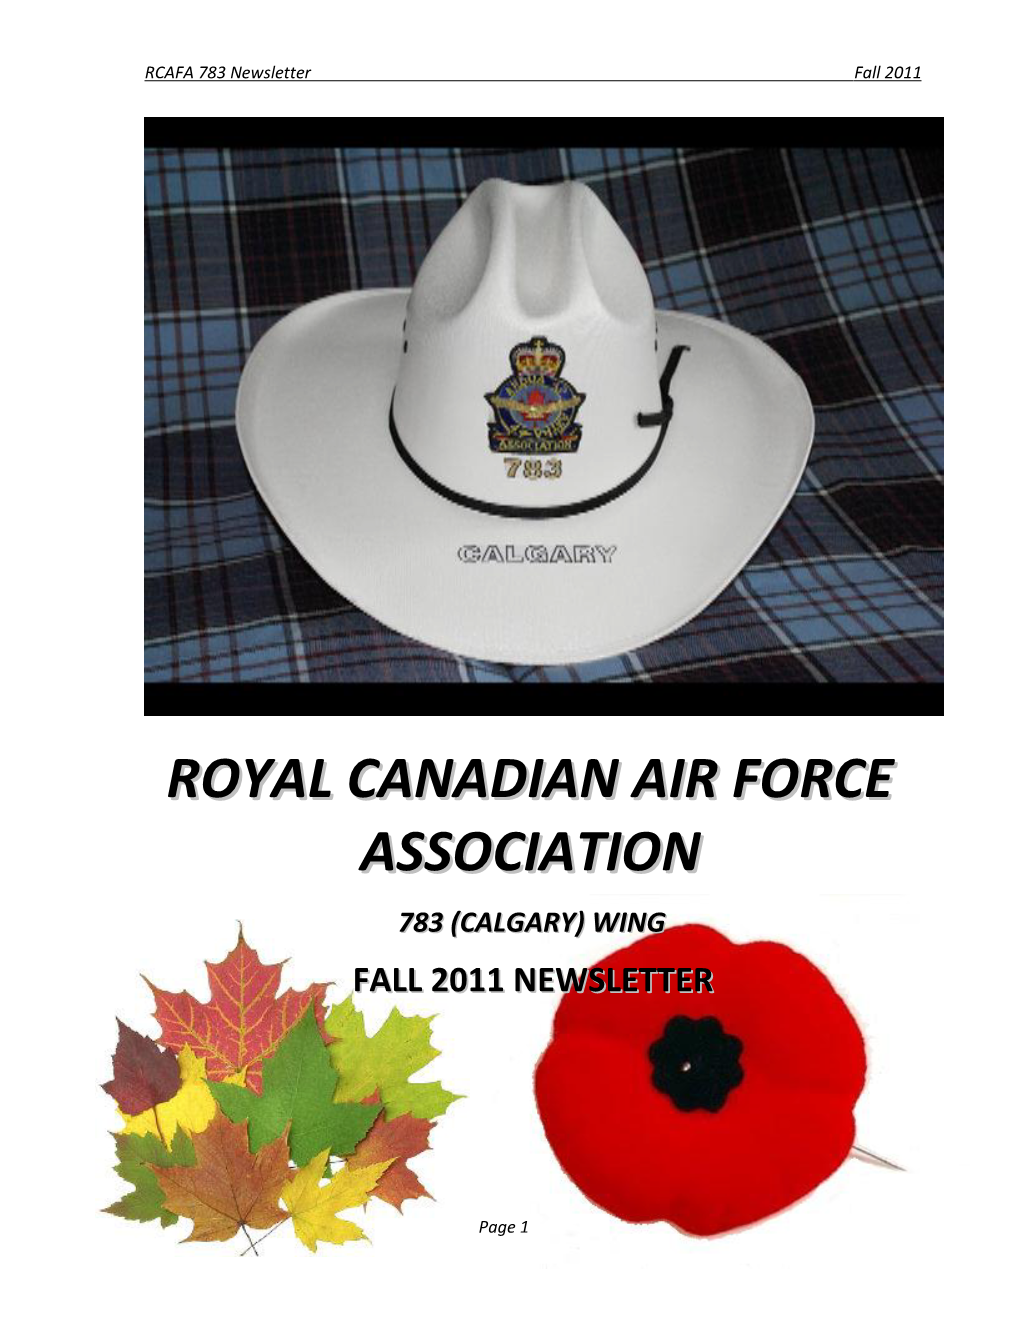 Royal Canadian Air Force Association) in Alignment with Alberta Group